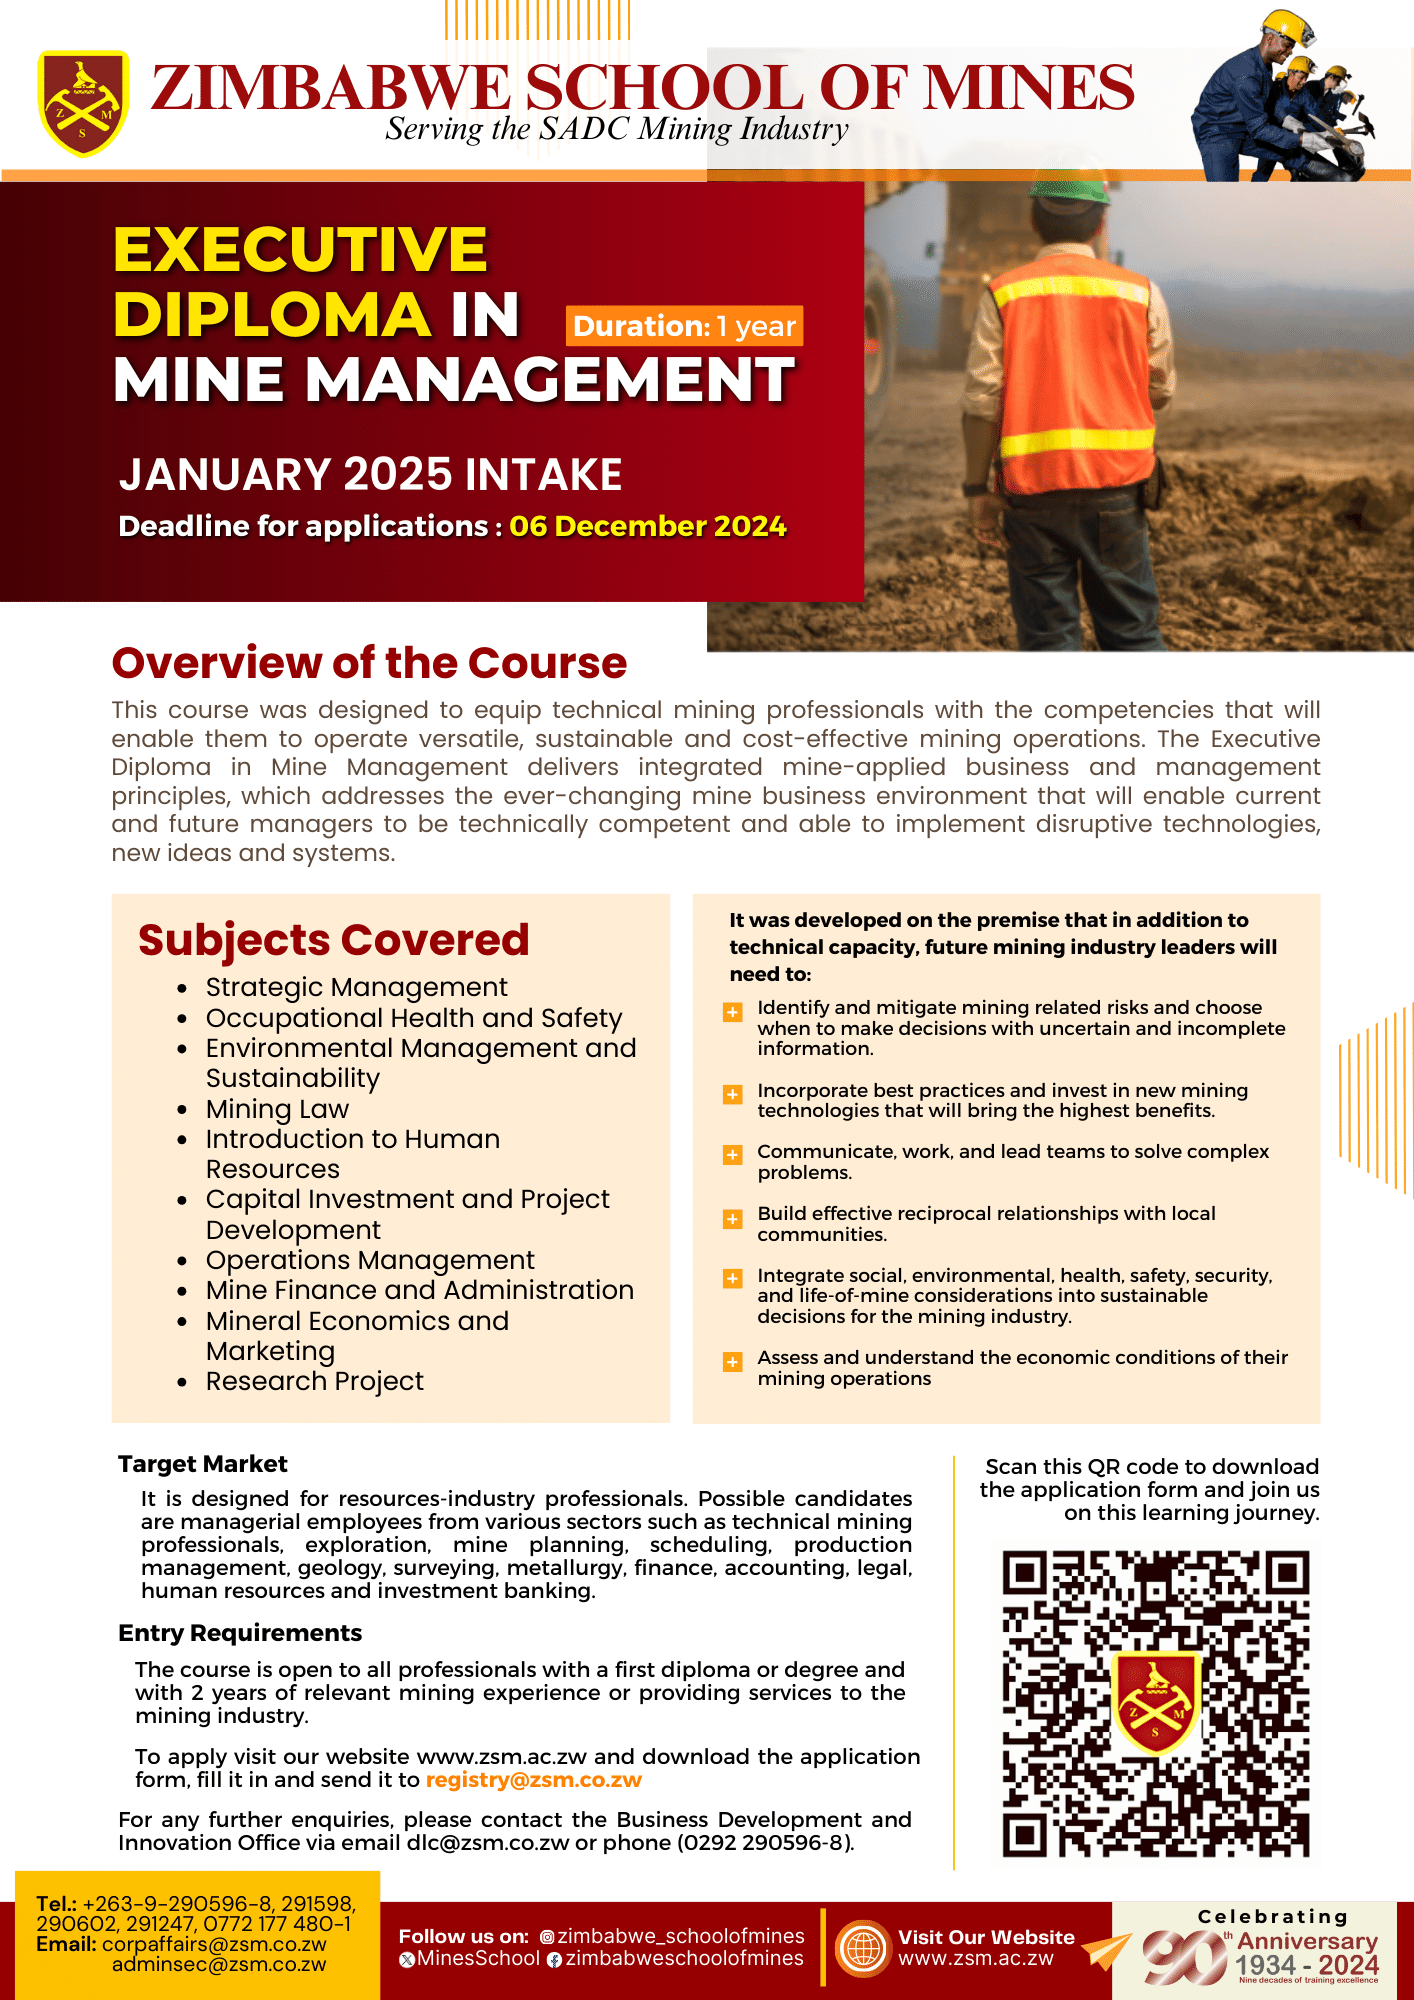 Executive Diploma in Mine Management